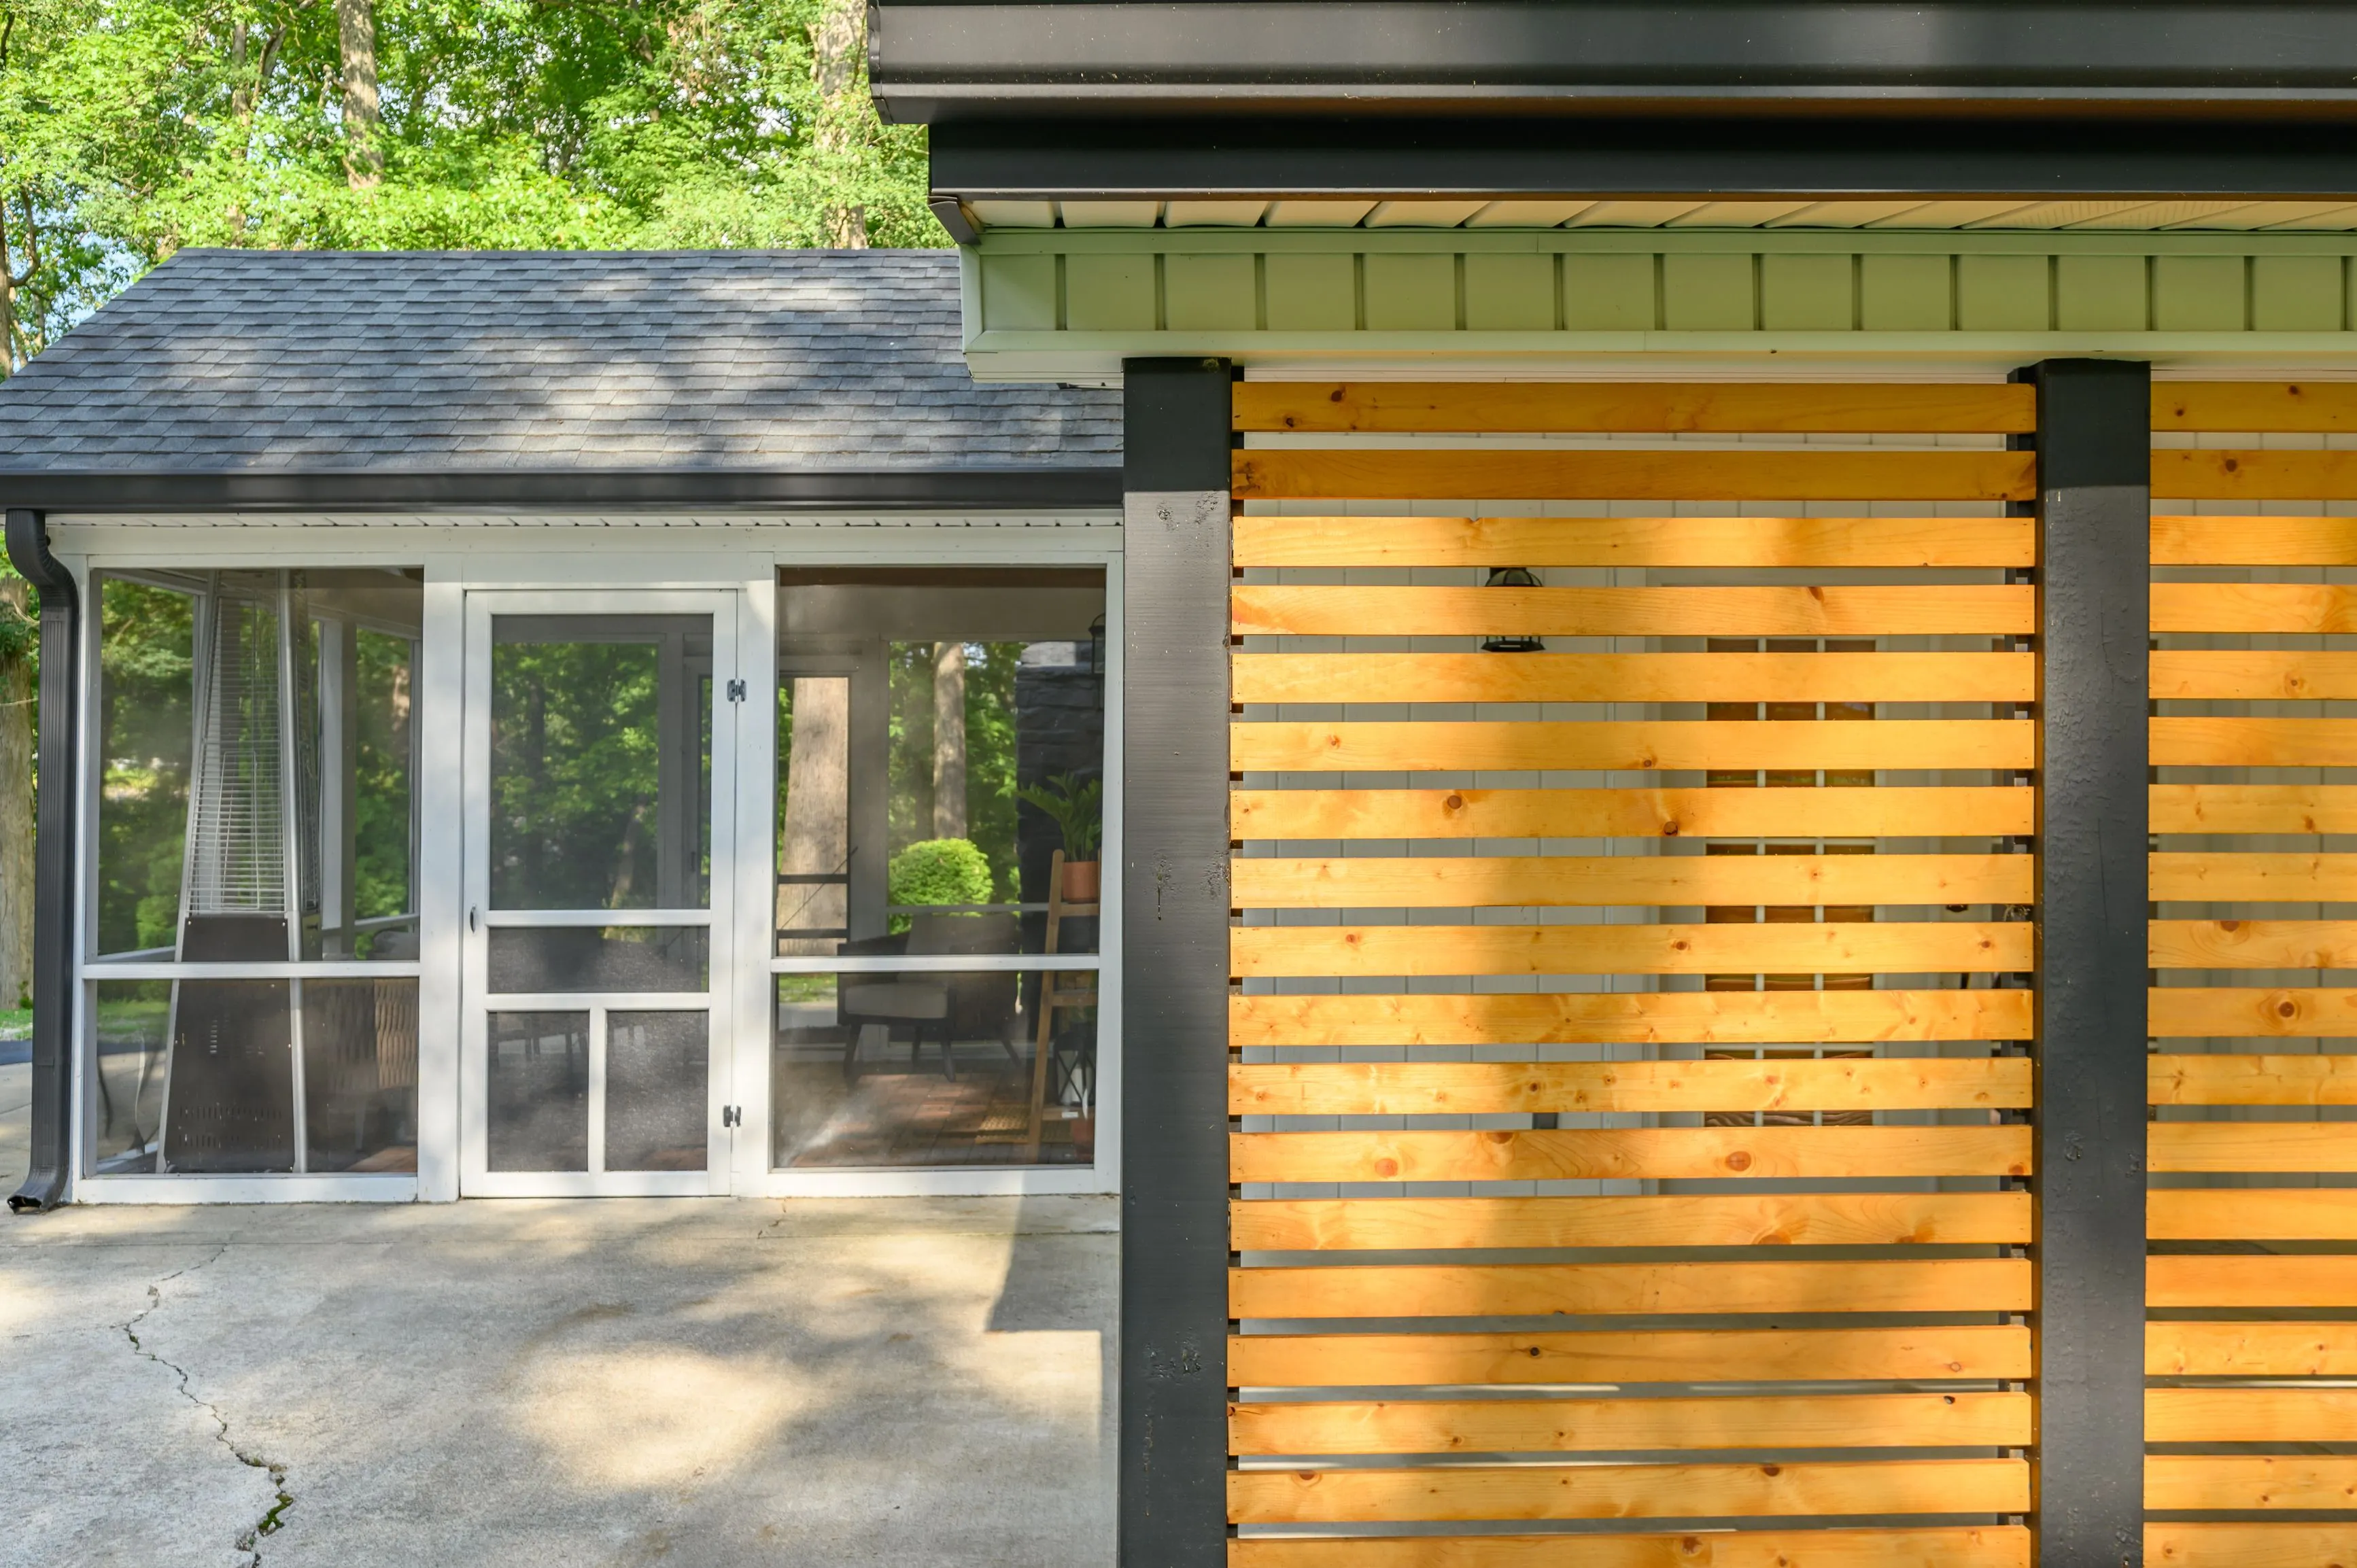 Exterior view of a modern house with a wooden slat wall, black support columns, and sliding glass doors leading to a patio.